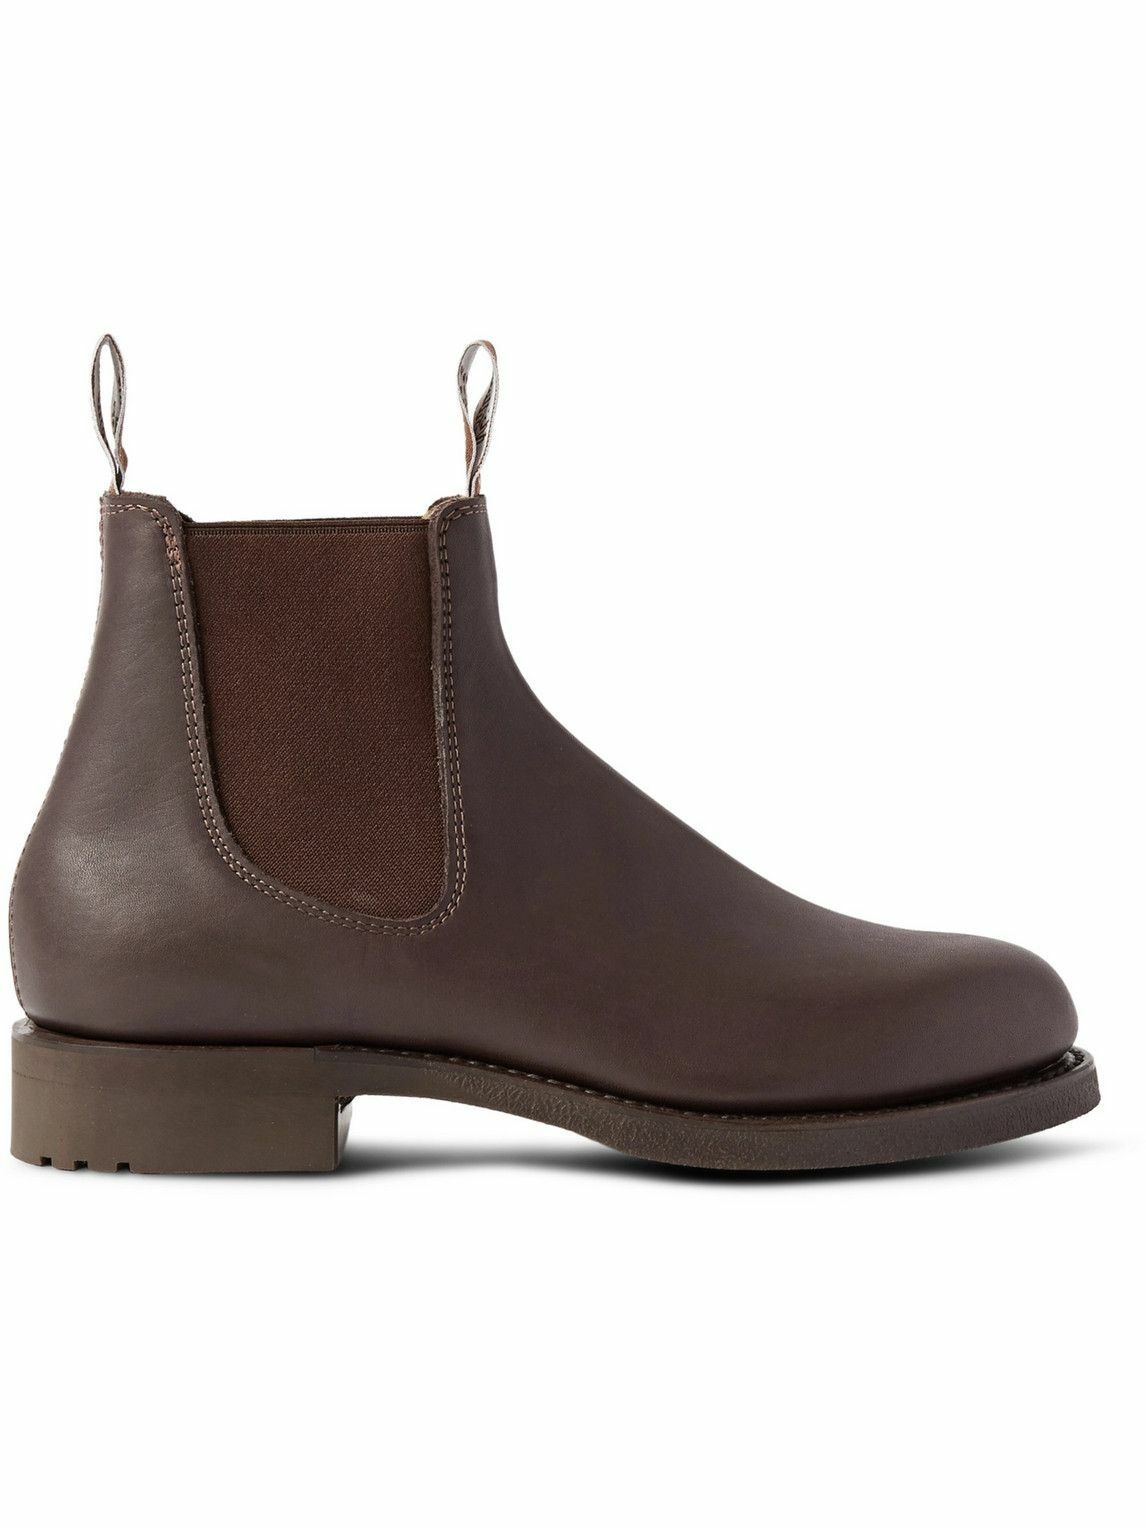 Photo: R.M.Williams - Gardener Whole-Cut Leather Chelsea Boots - Brown